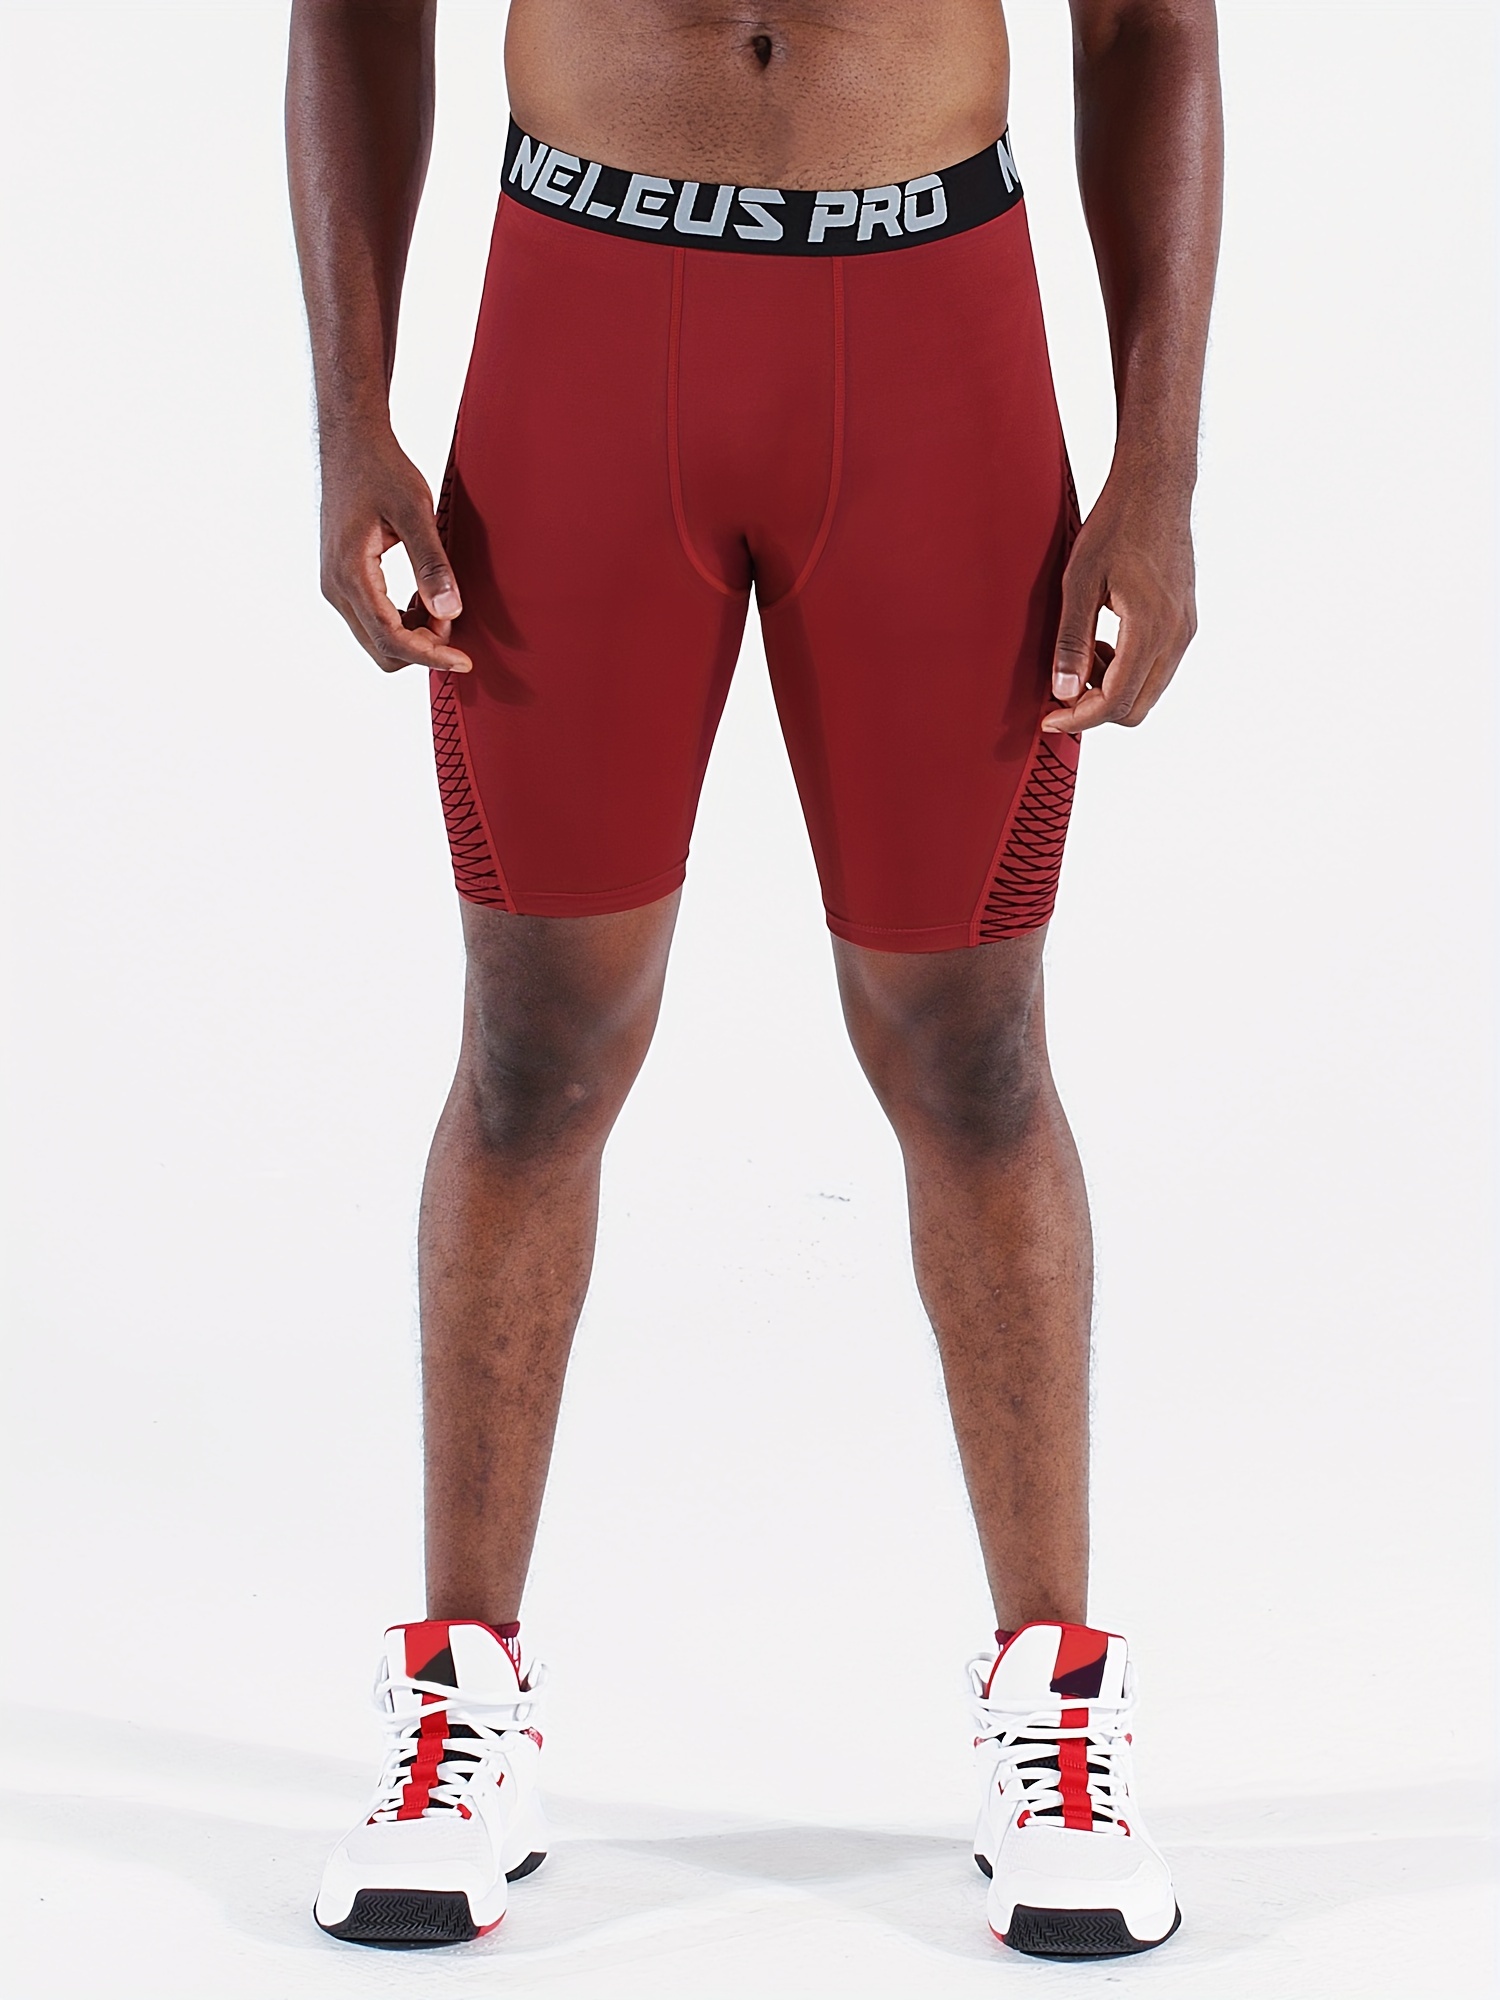 REDSHORE Basketball Sports Pants ¾ Compression Pants with Knee